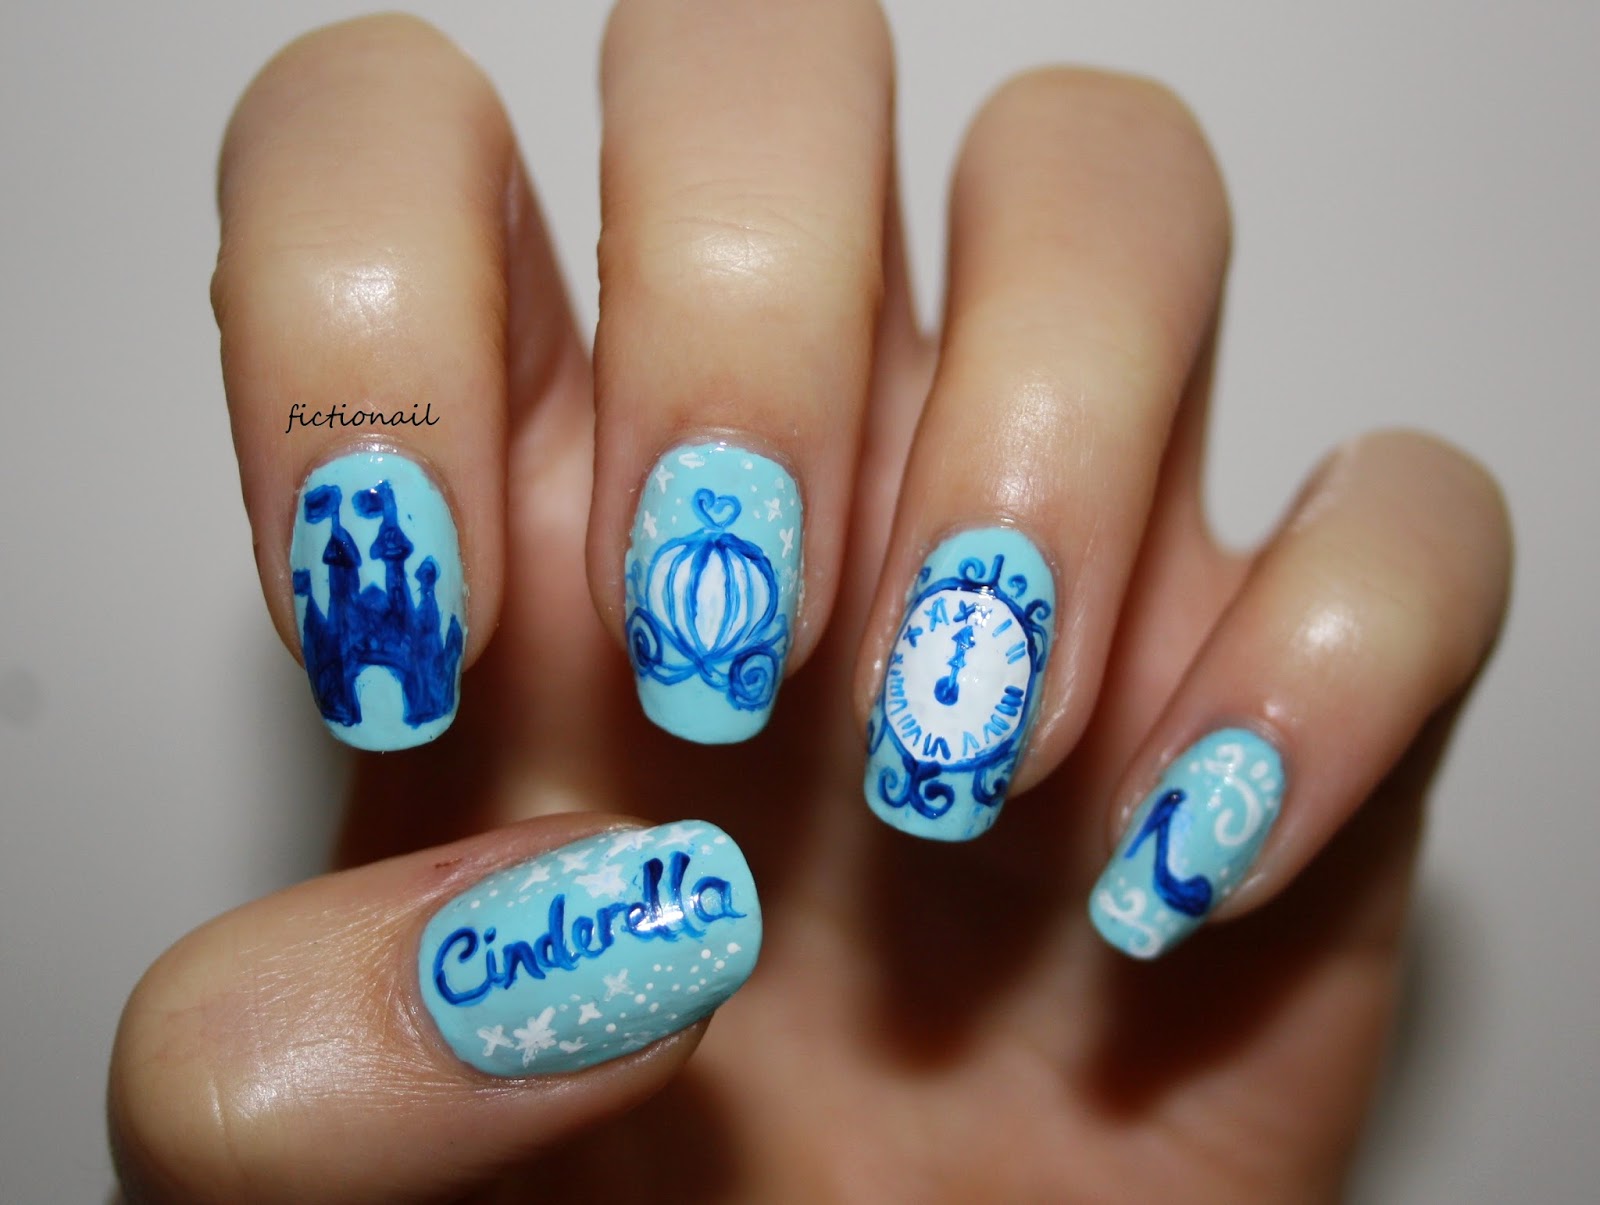 5. "Disney World Inspired Nails" - wide 8